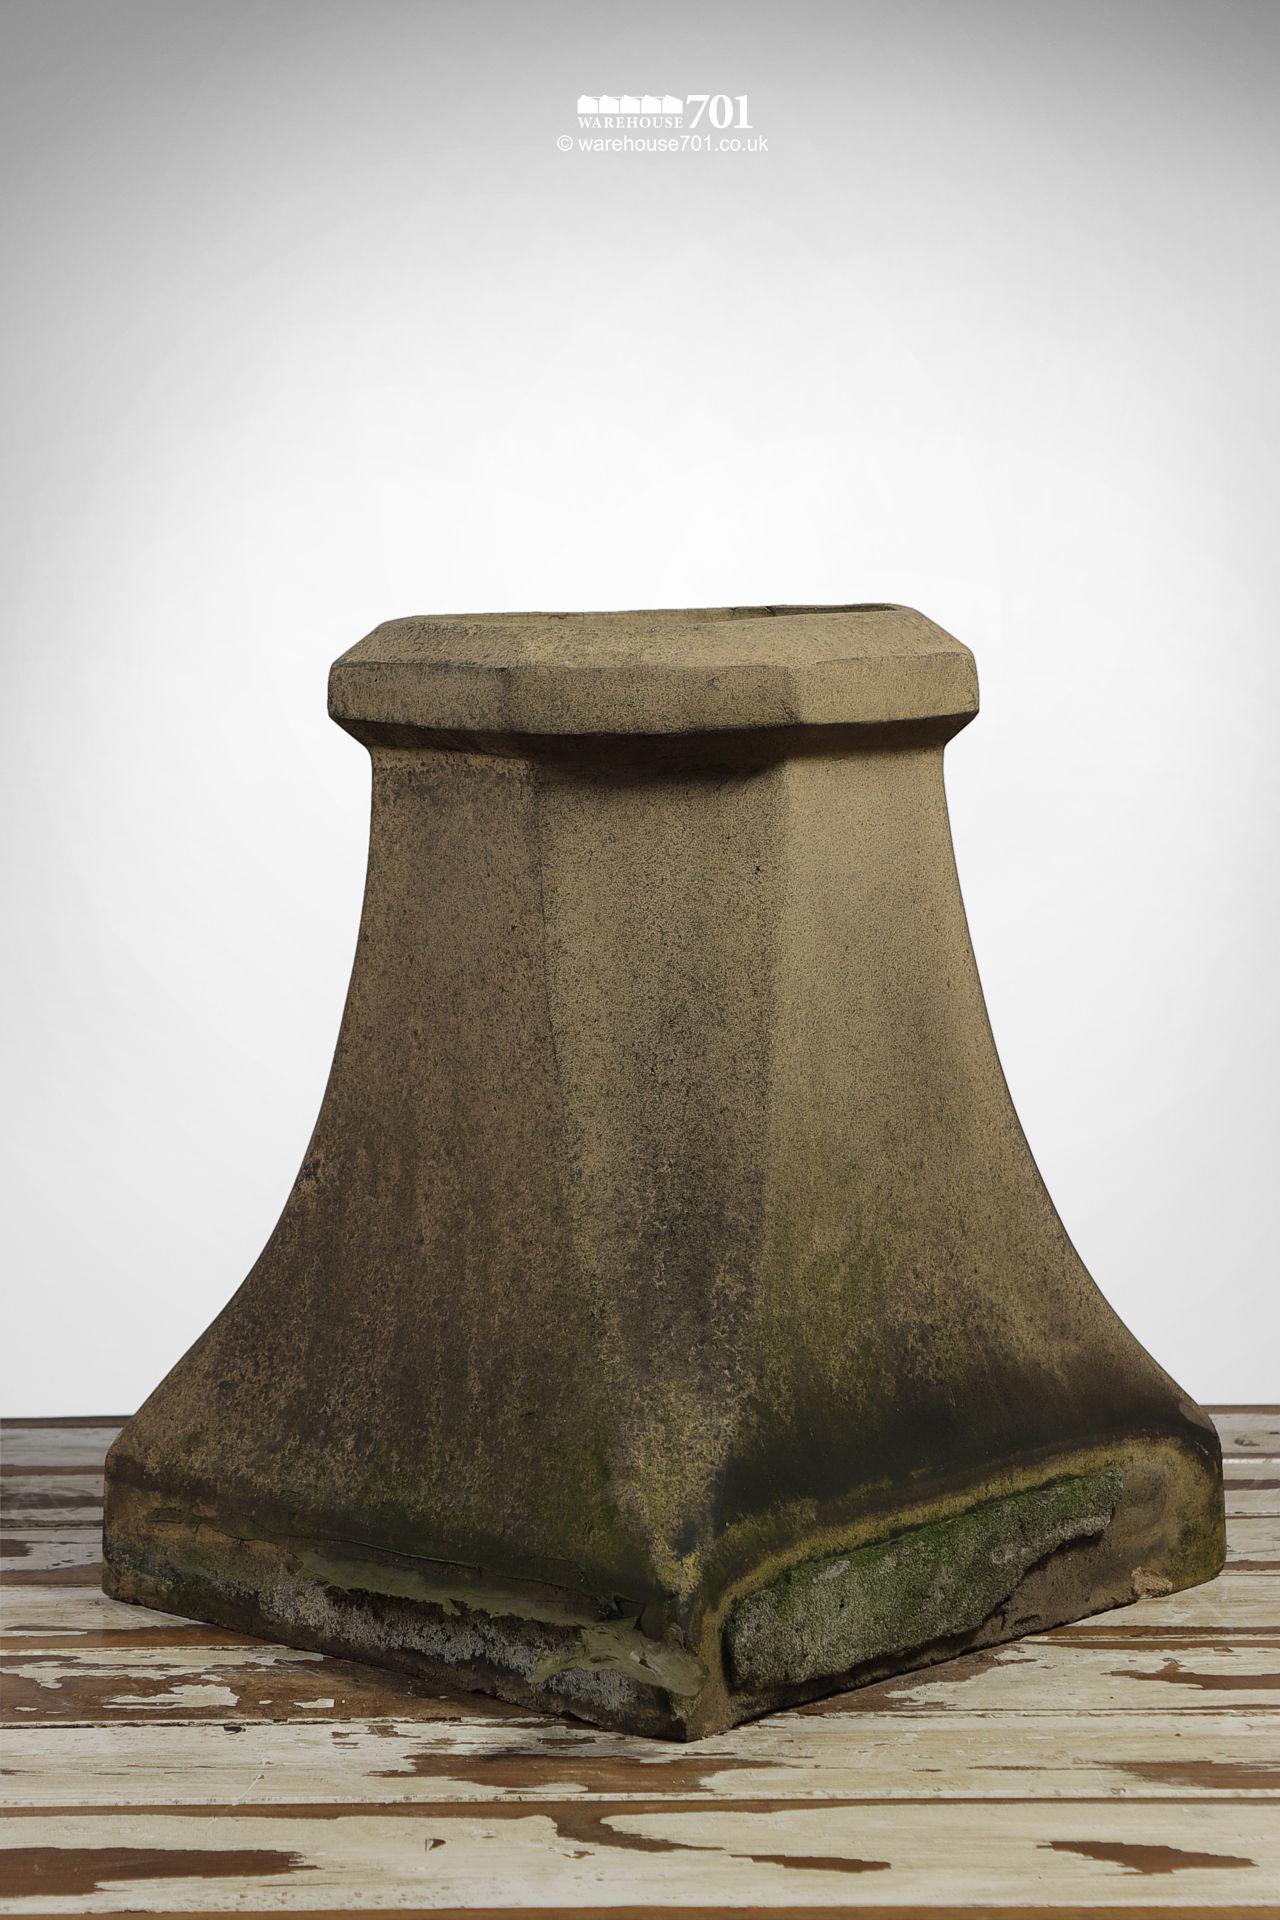 Old Buff Colour Halifax Style Clay Chimney Pot #2